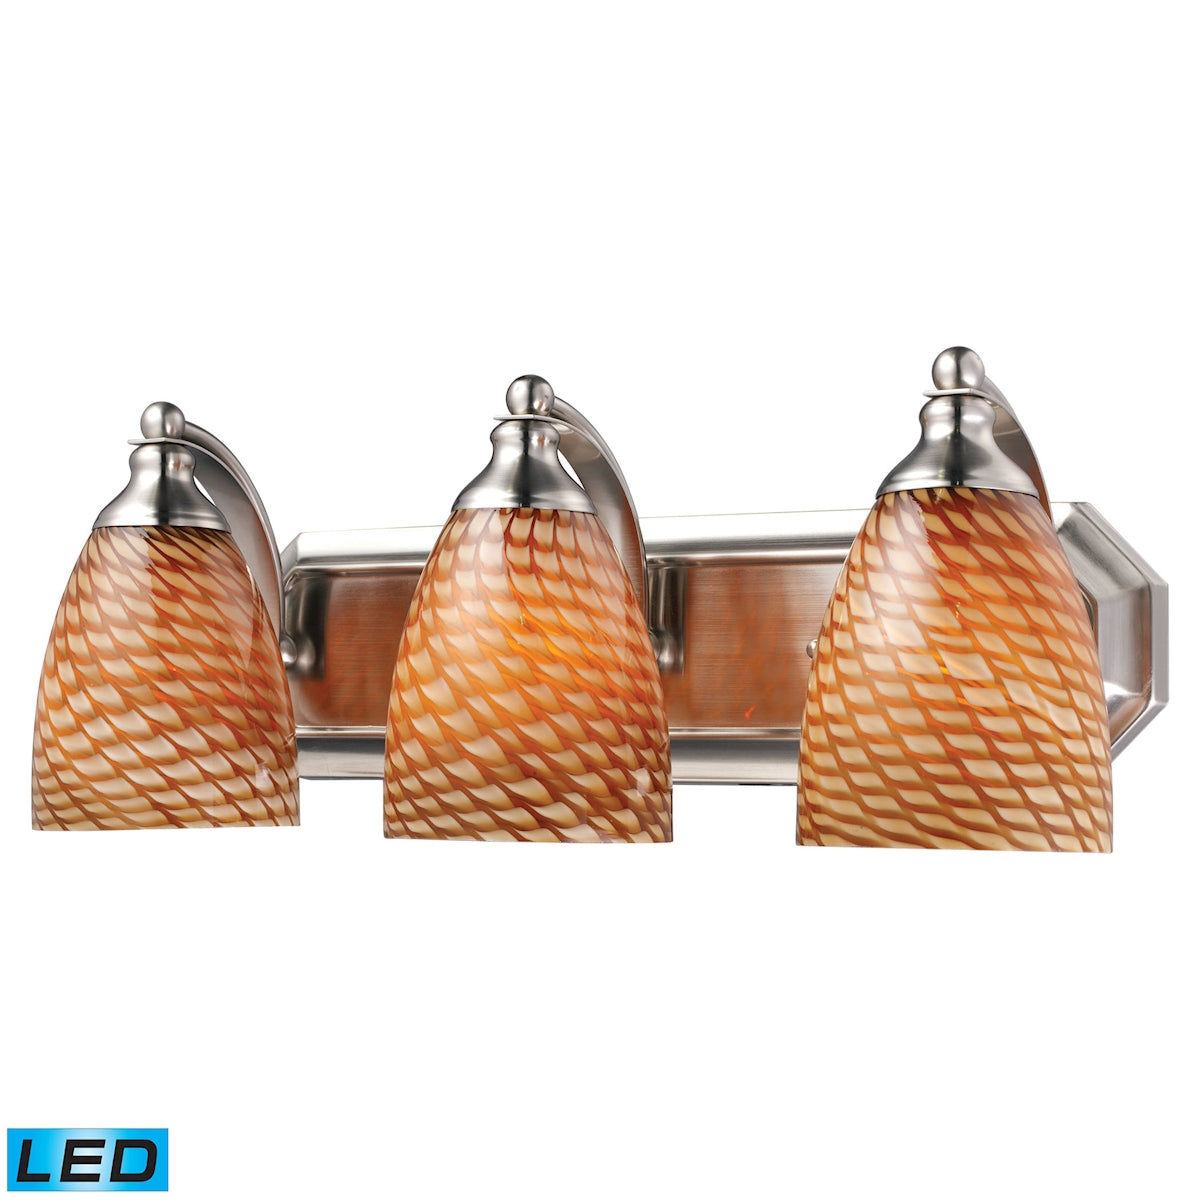 ELK Lighting 570-3N-C-LED Mix-N-Match Vanity 3-Light Wall Lamp in Satin Nickel with Cocoa Glass - Includes LED Bulbs